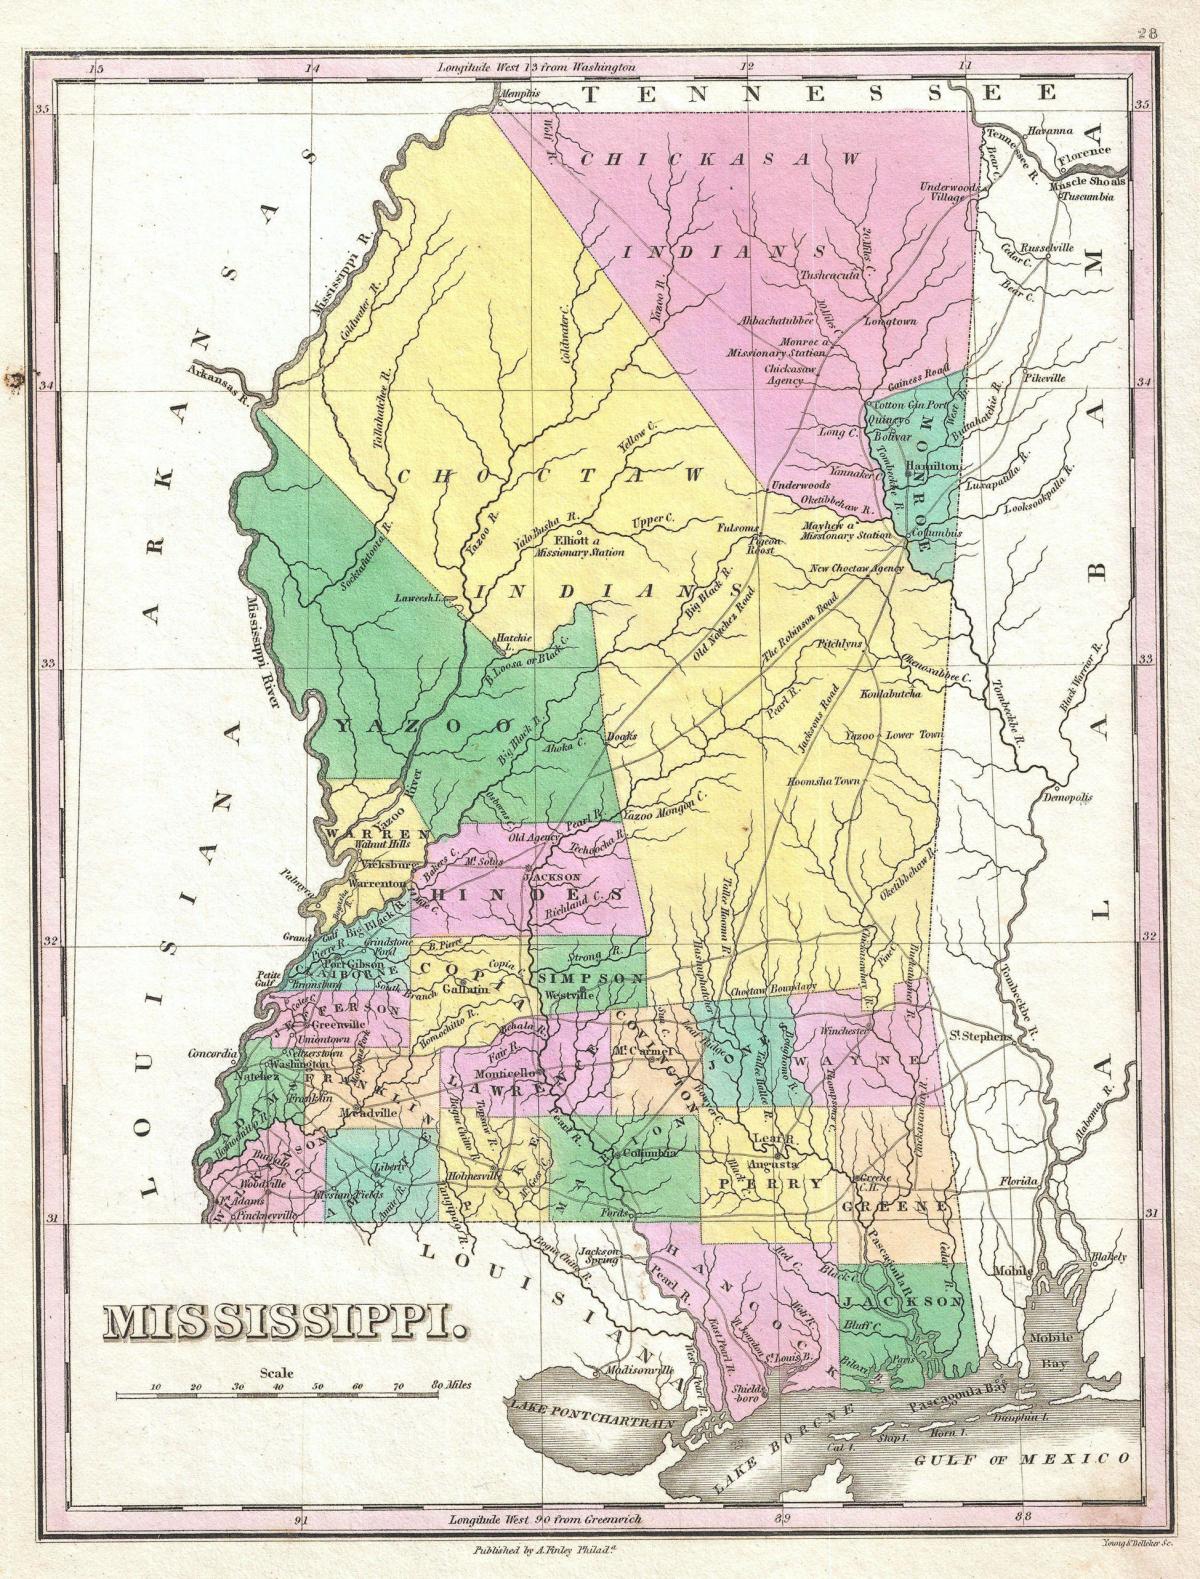 colorful historical map of Mississippi, 1800s